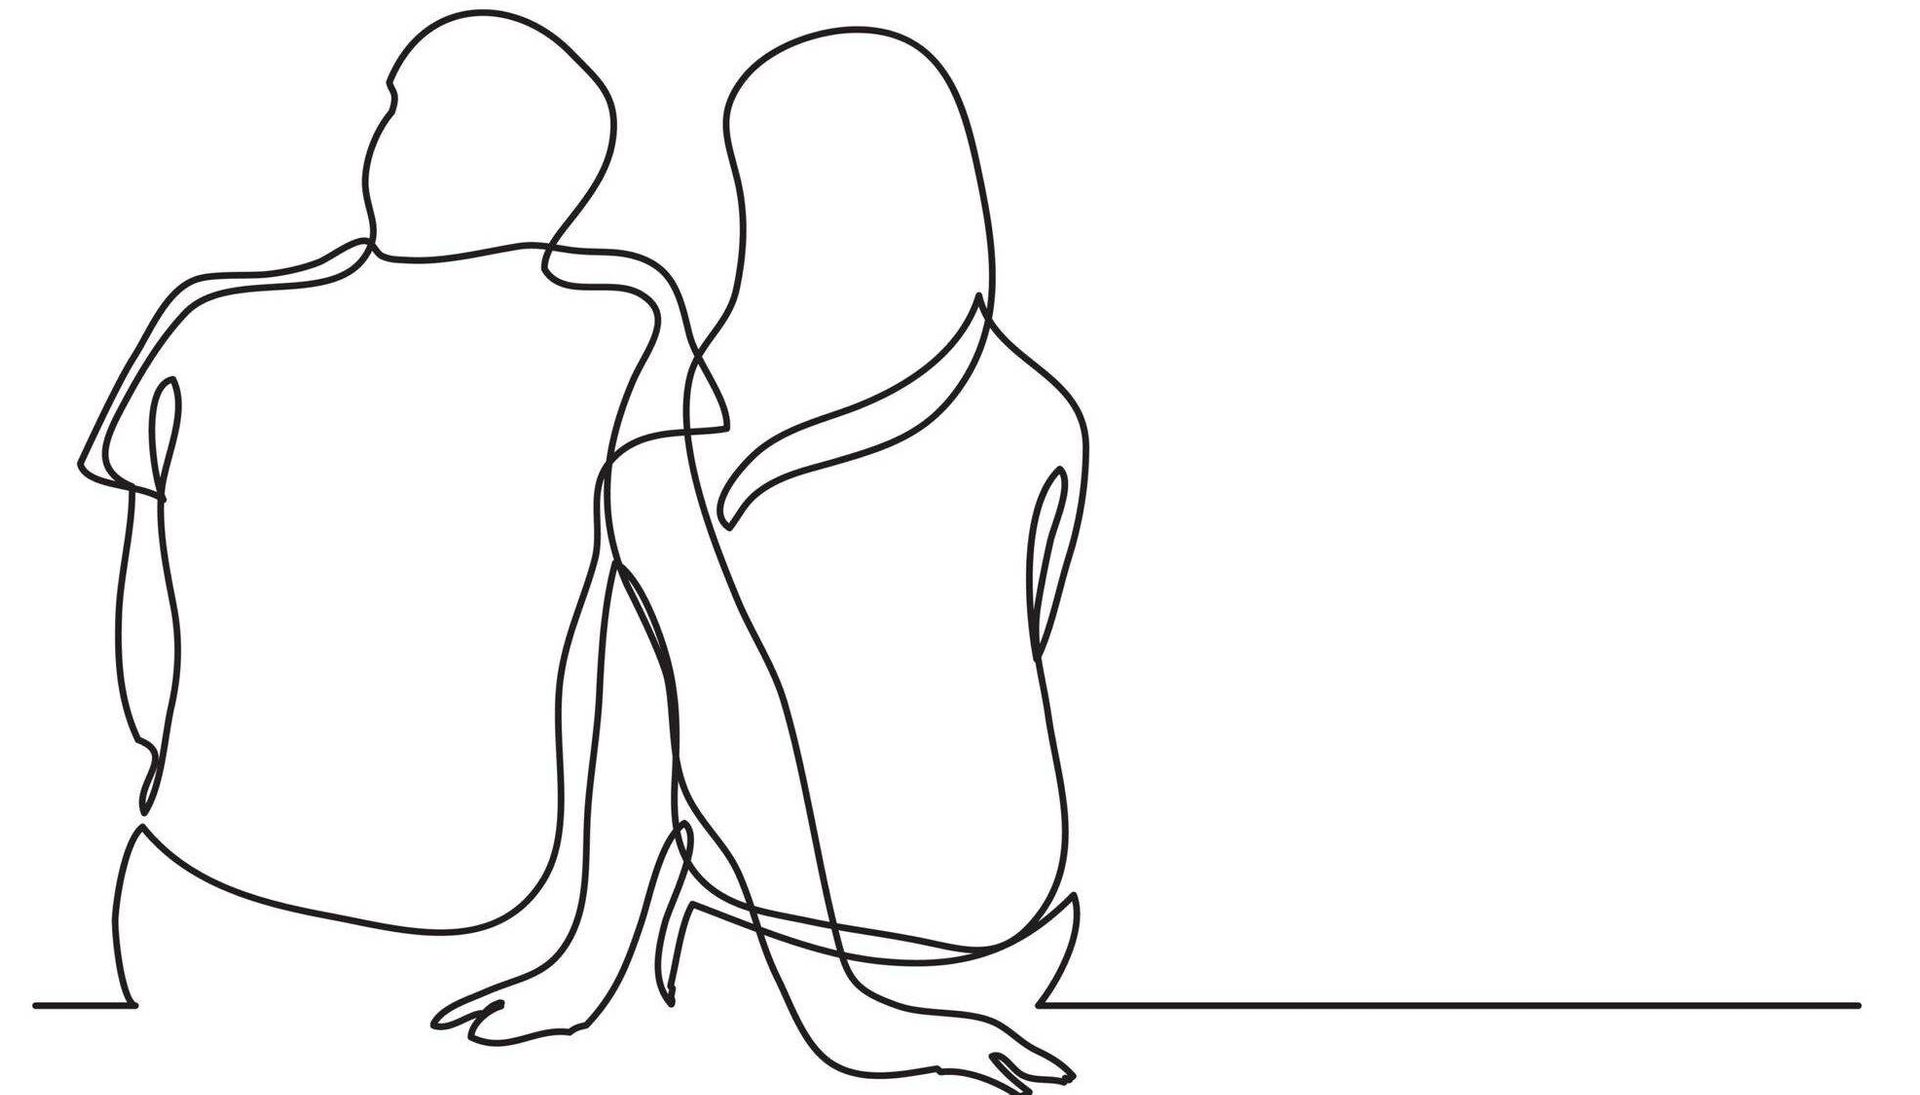 Line drawing illustration of a couple sitting next two each other. Age gap, love, Rewire, PBS